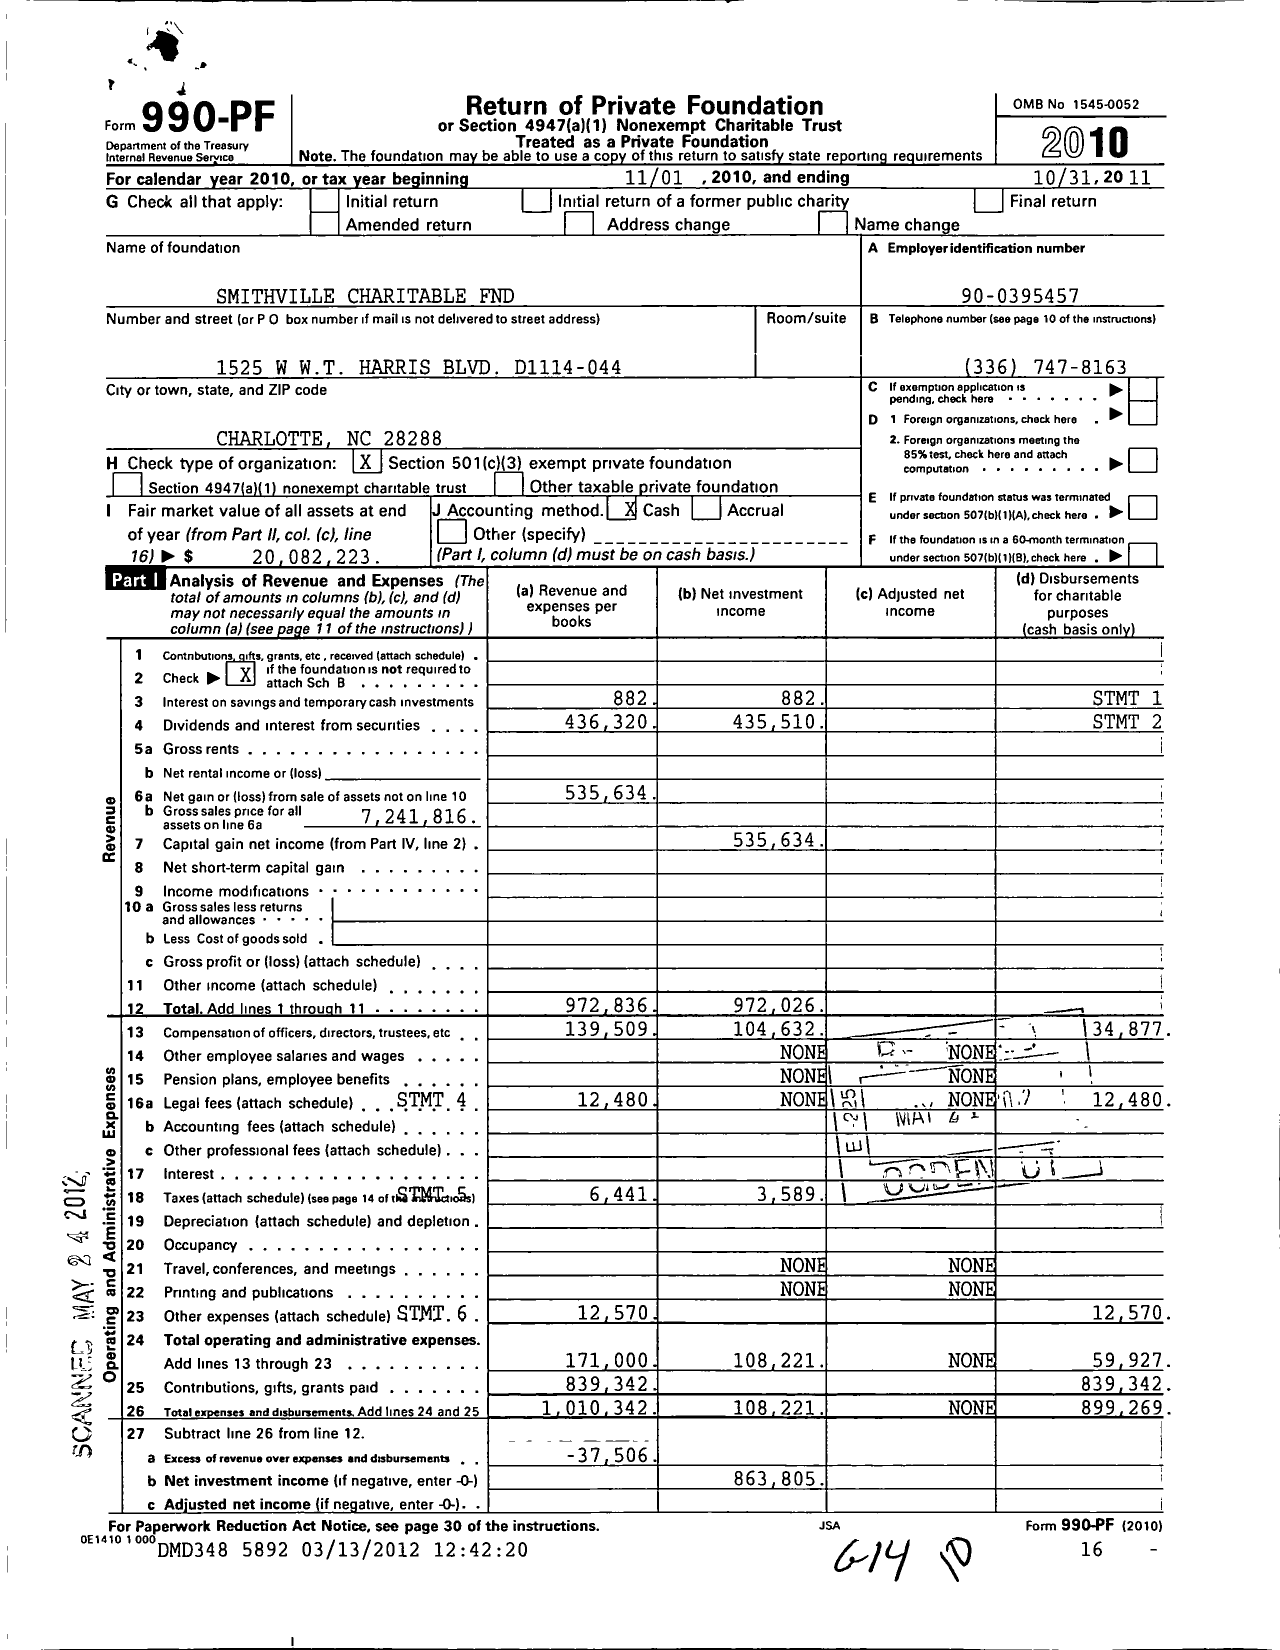 Image of first page of 2010 Form 990PF for Smithville Charitable Foundation